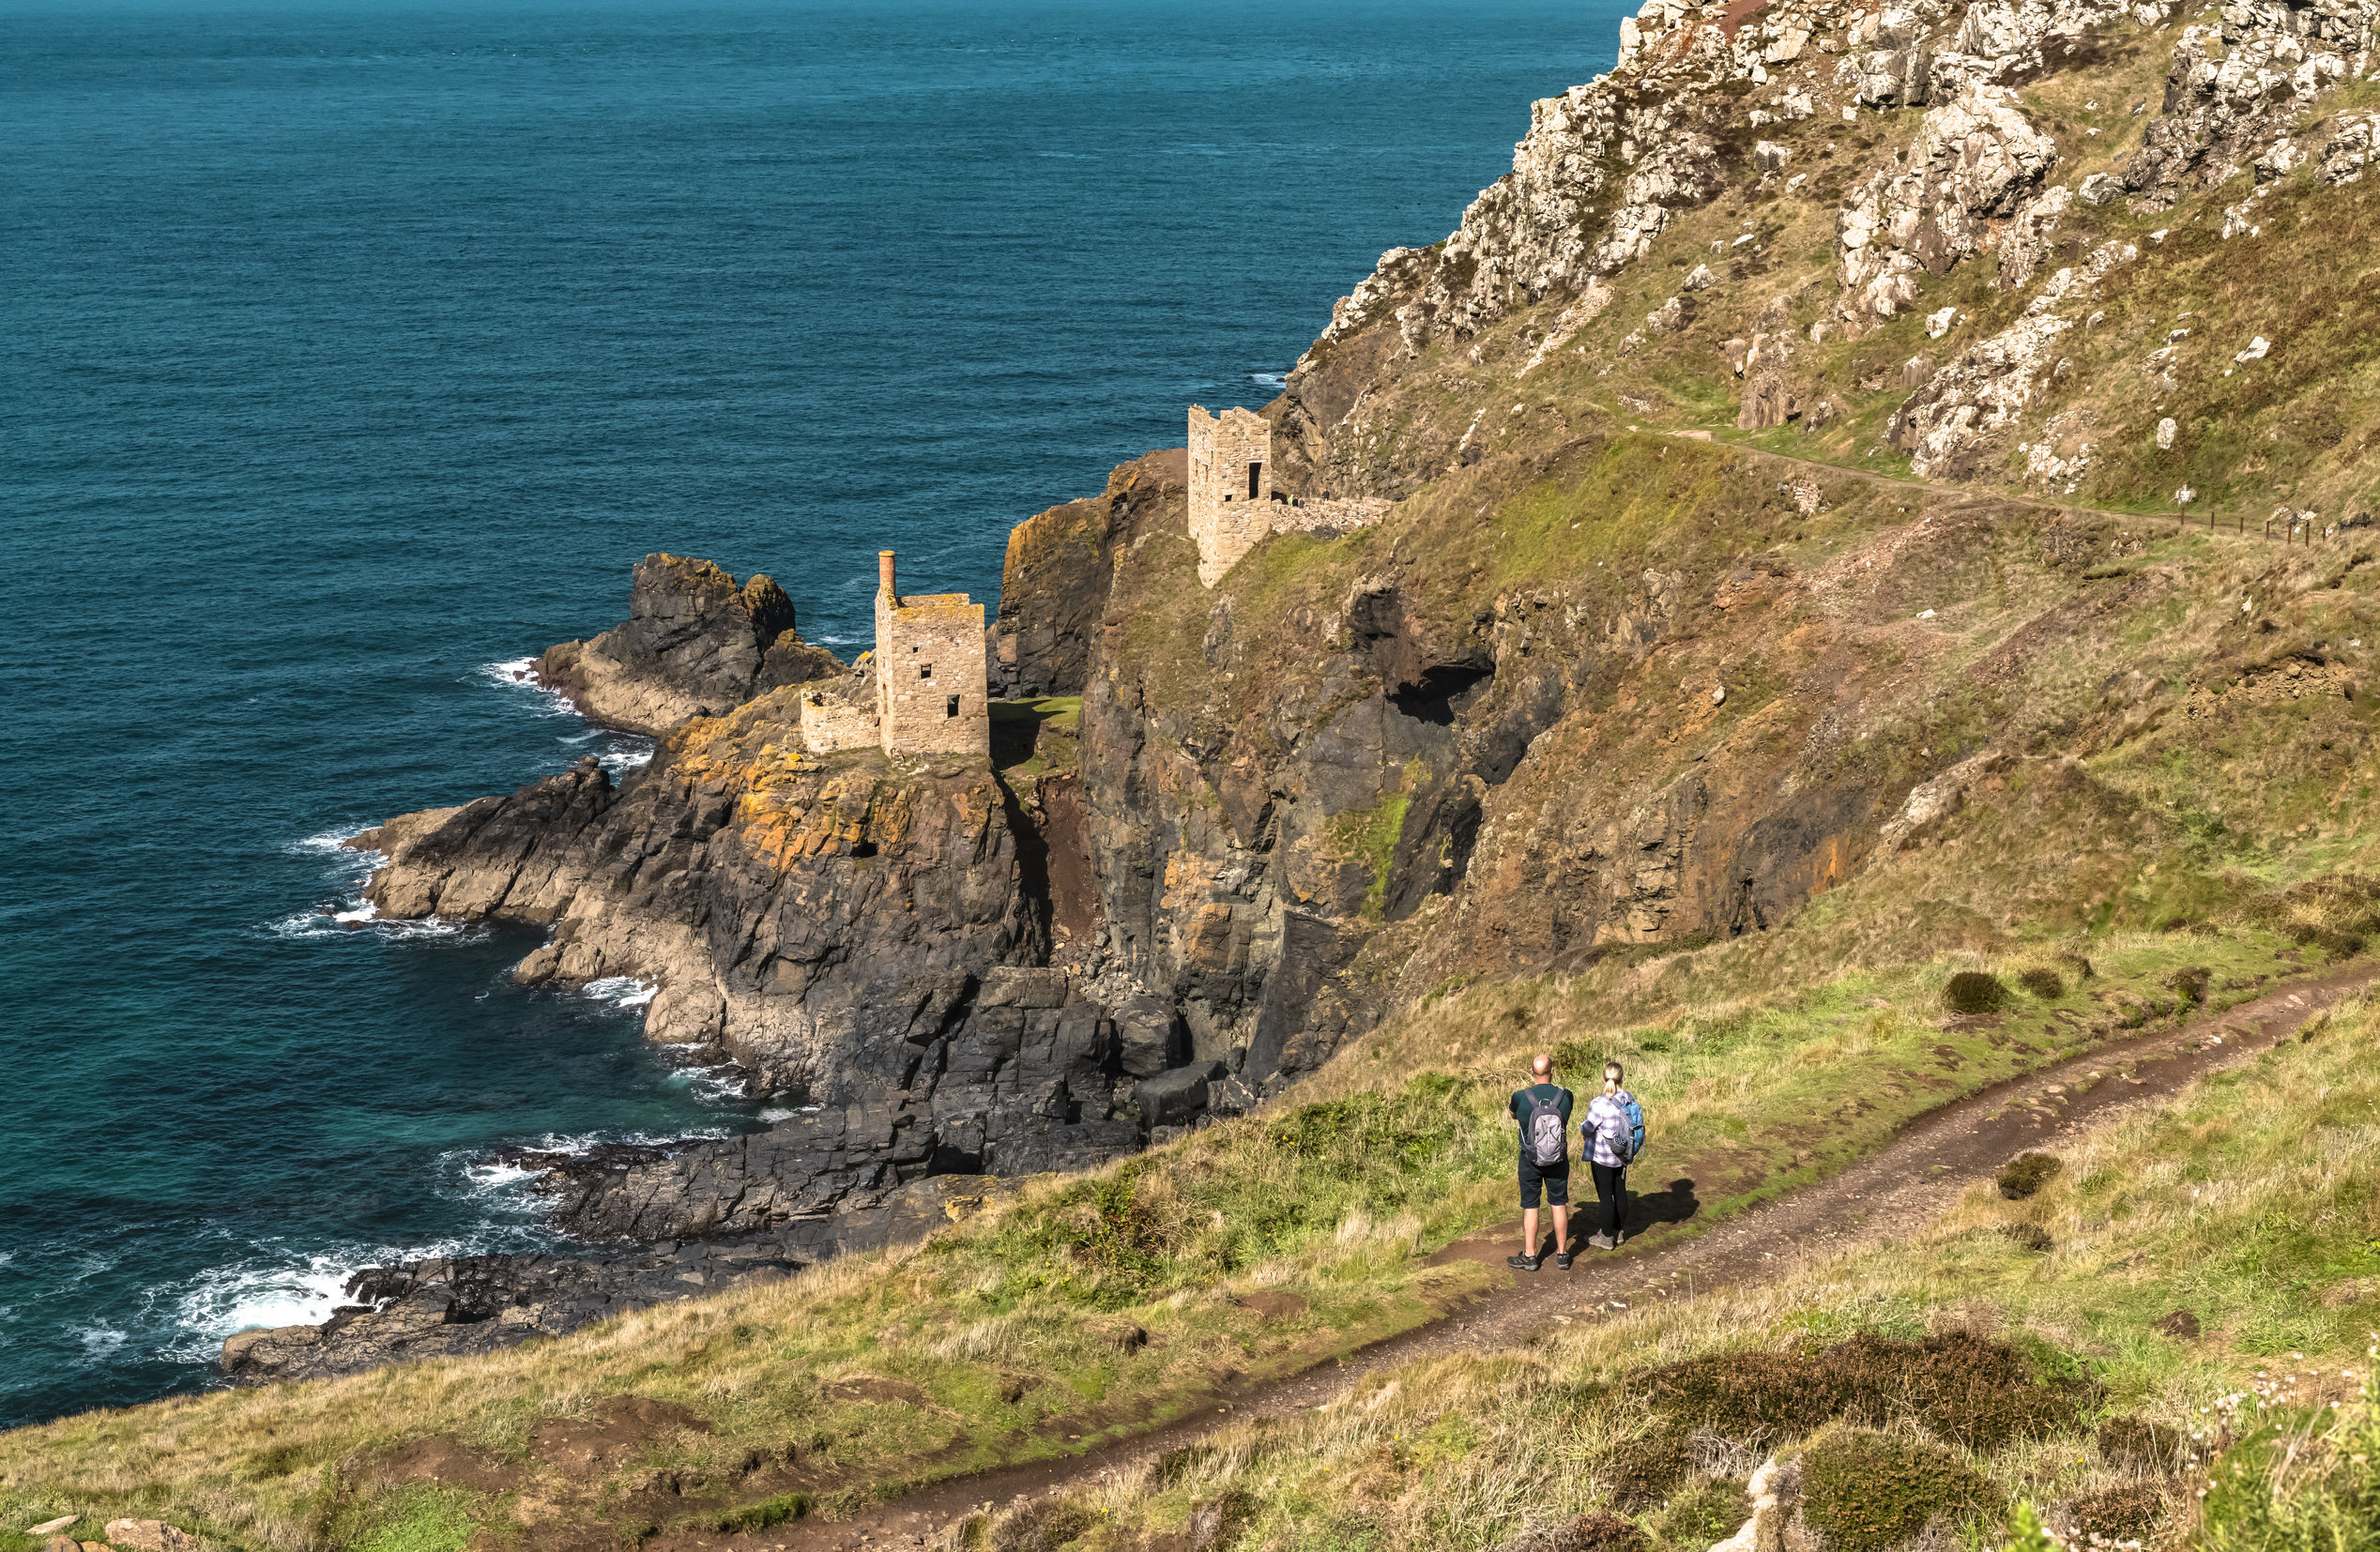 Remains of the crown mine at Botallack, Part of the Cornwall Mining Landscape World Heritage Site